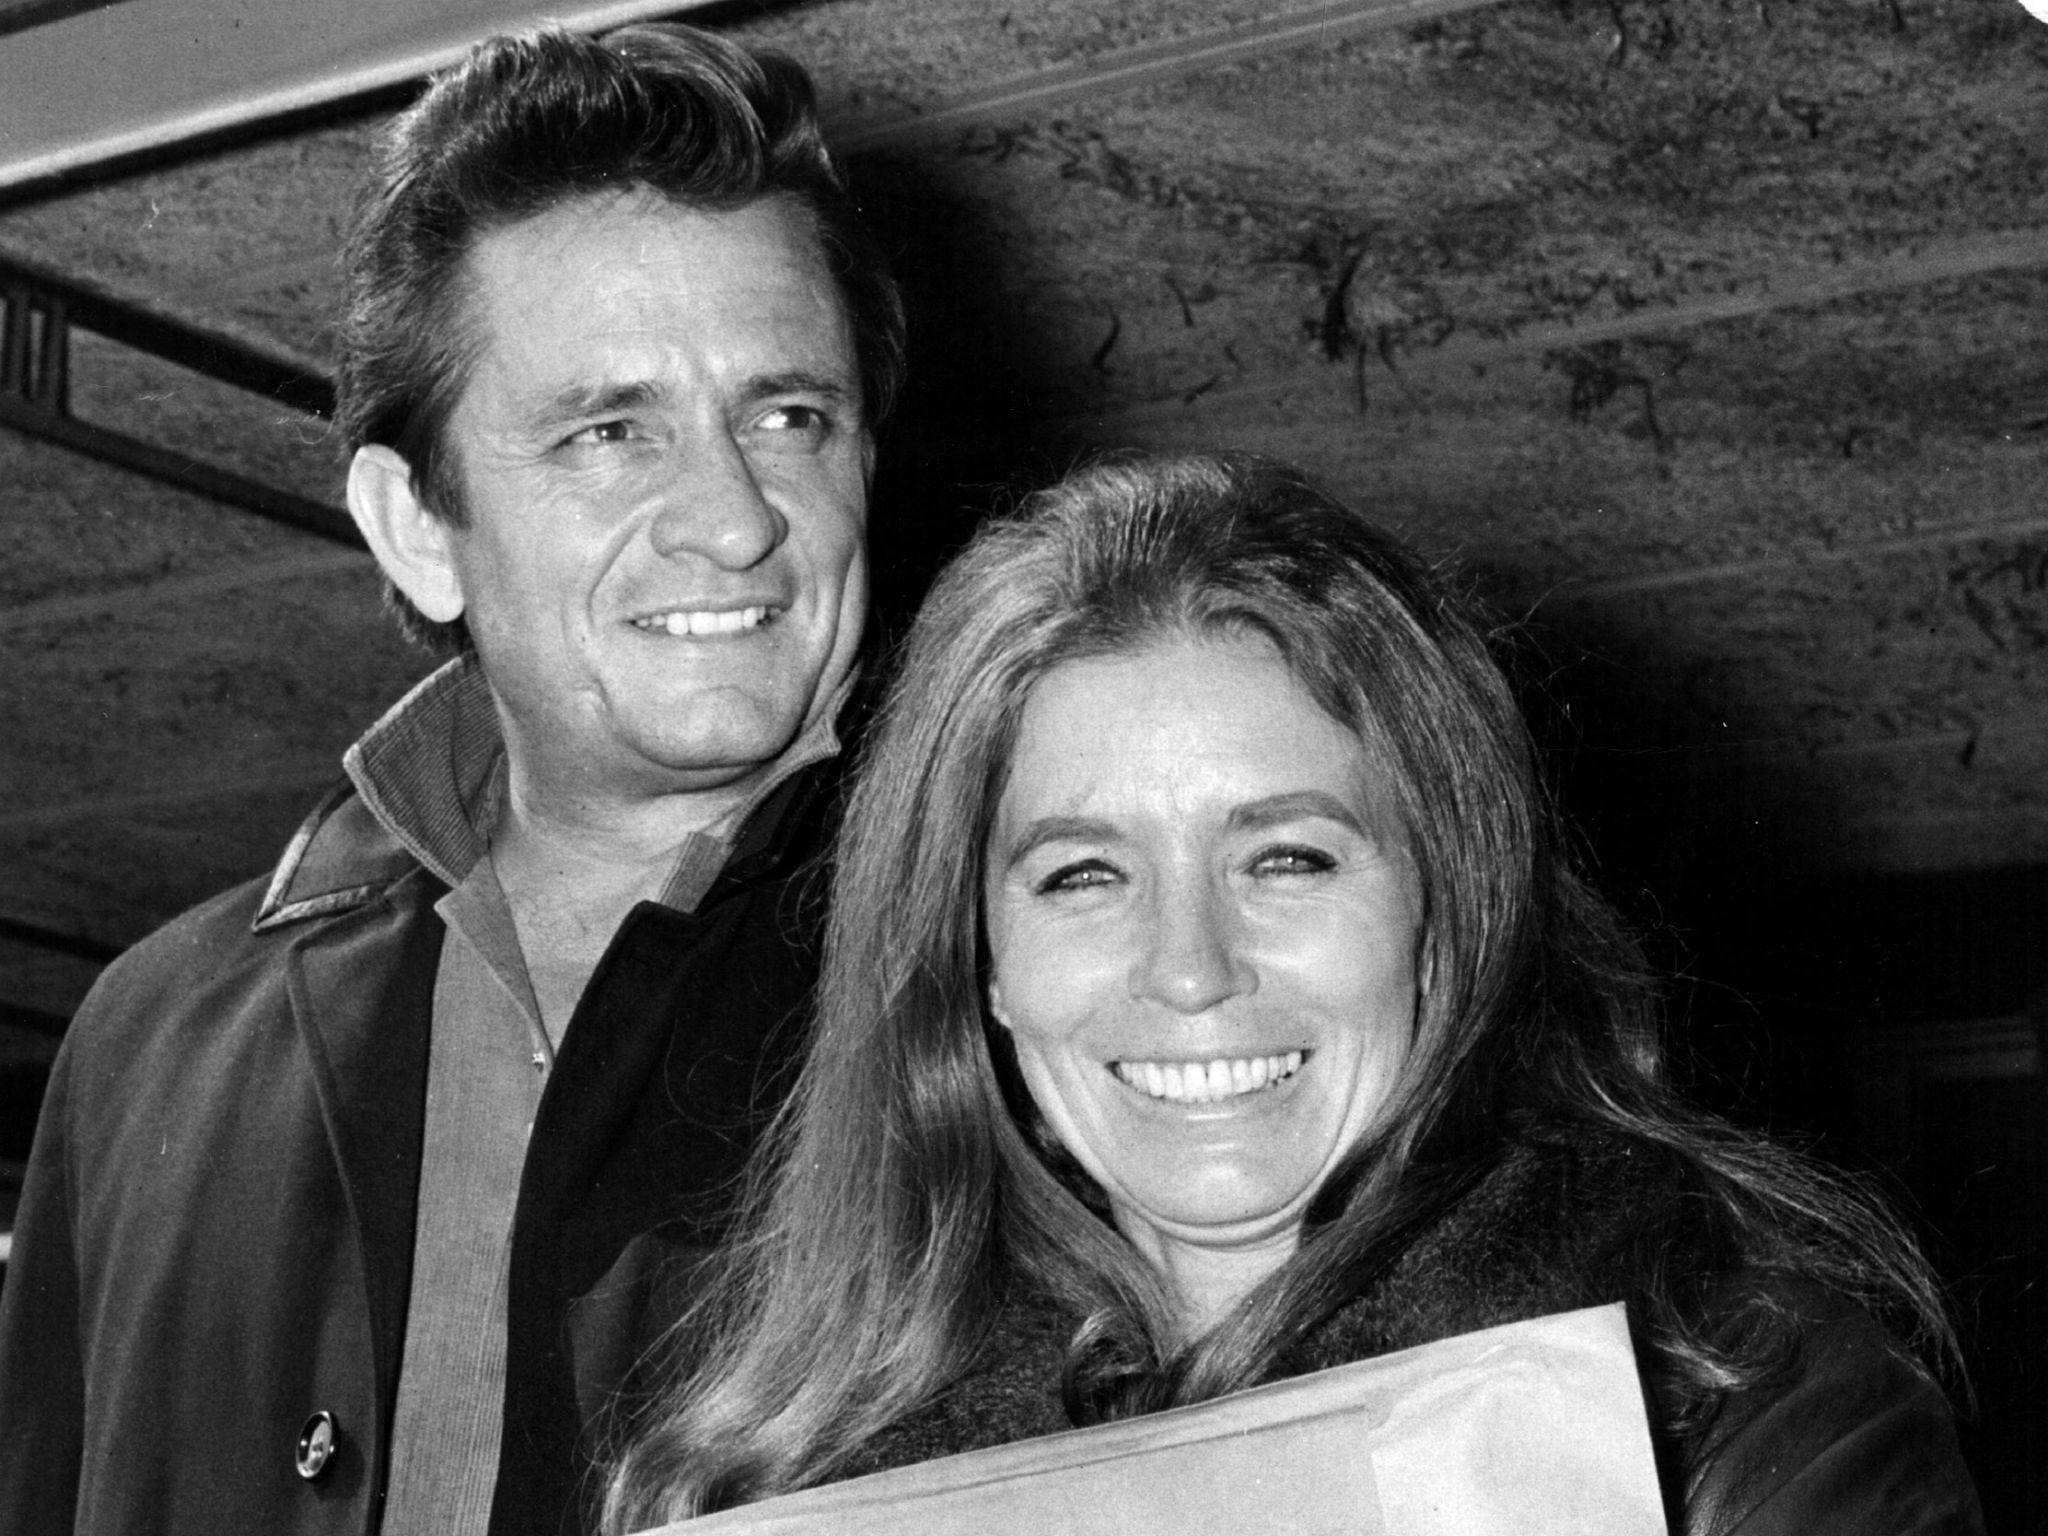 Johnny Cash and June Carter Cash arrive in London in 1968